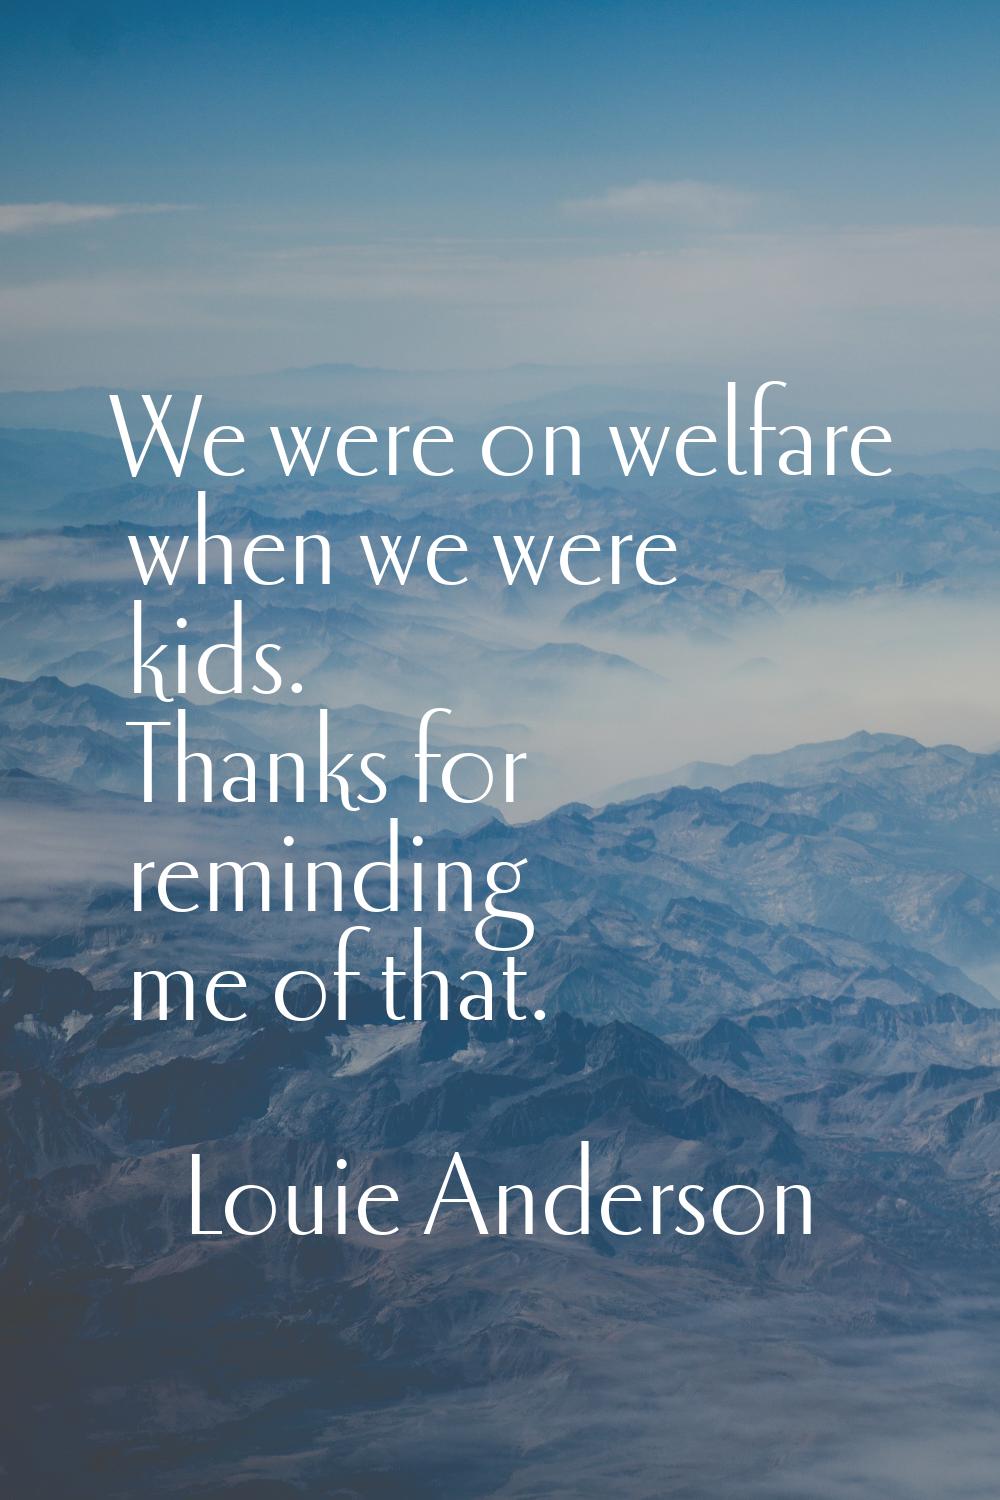 We were on welfare when we were kids. Thanks for reminding me of that.